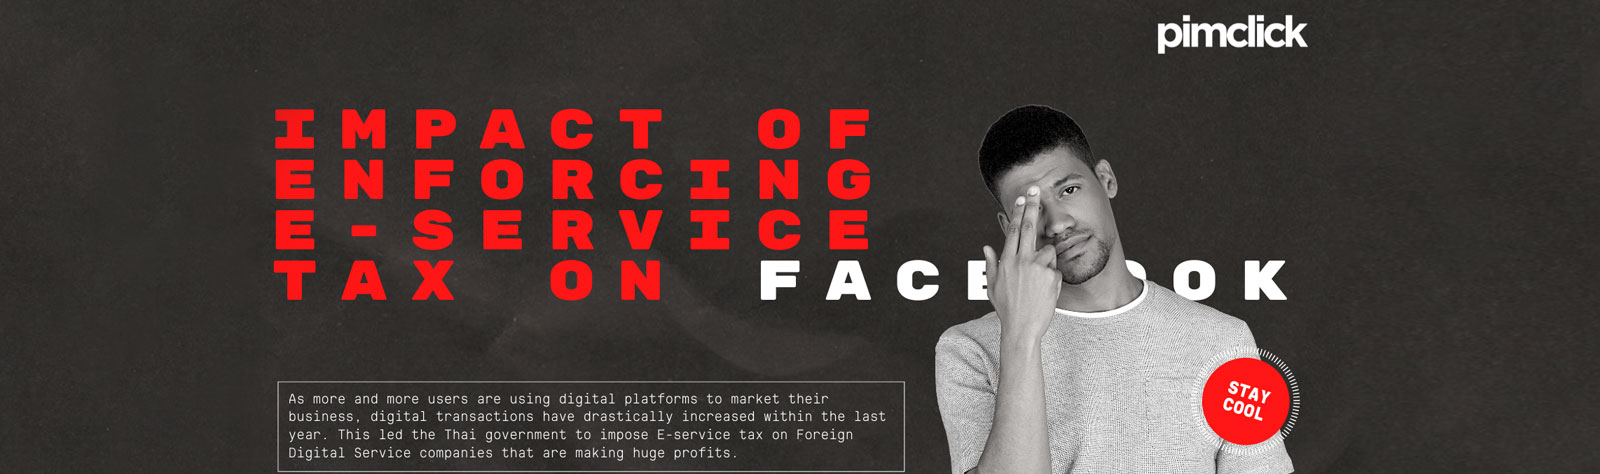 Impact of enforcing E-service tax on Facebook